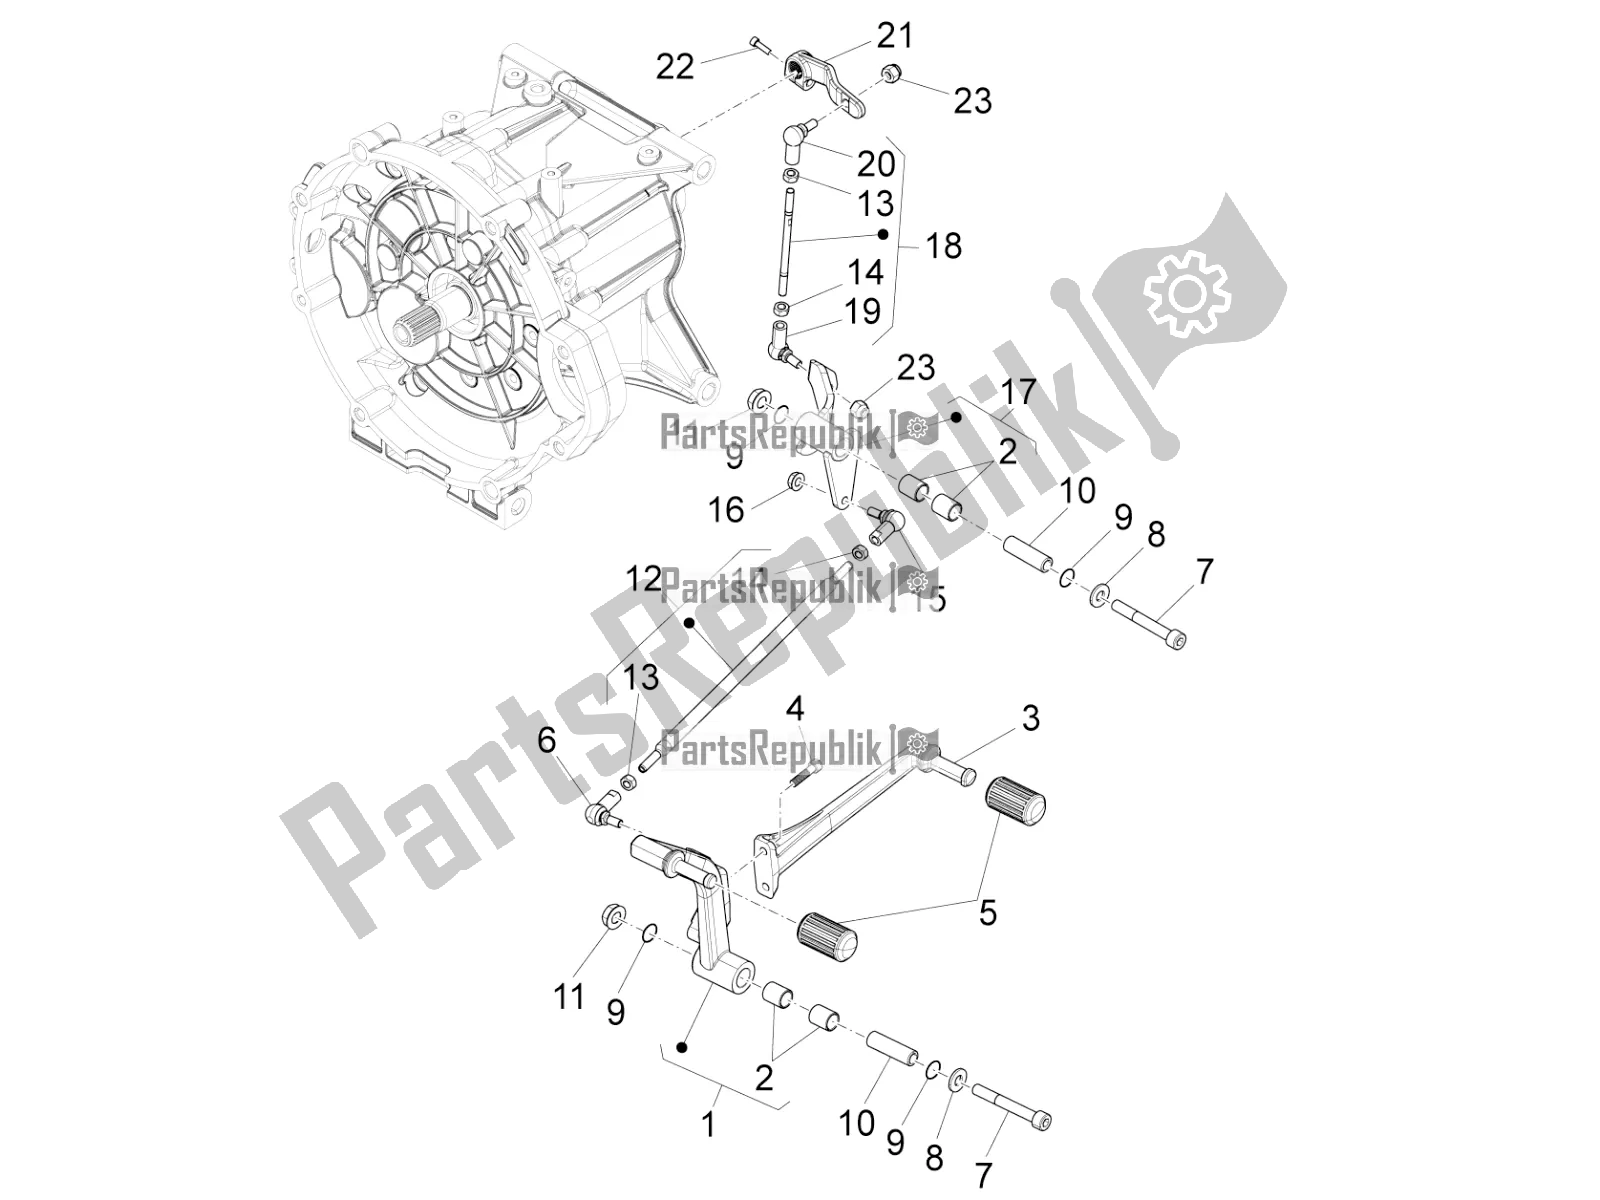 All parts for the Gear Lever of the Moto-Guzzi California 1400 Touring ABS USA 2019